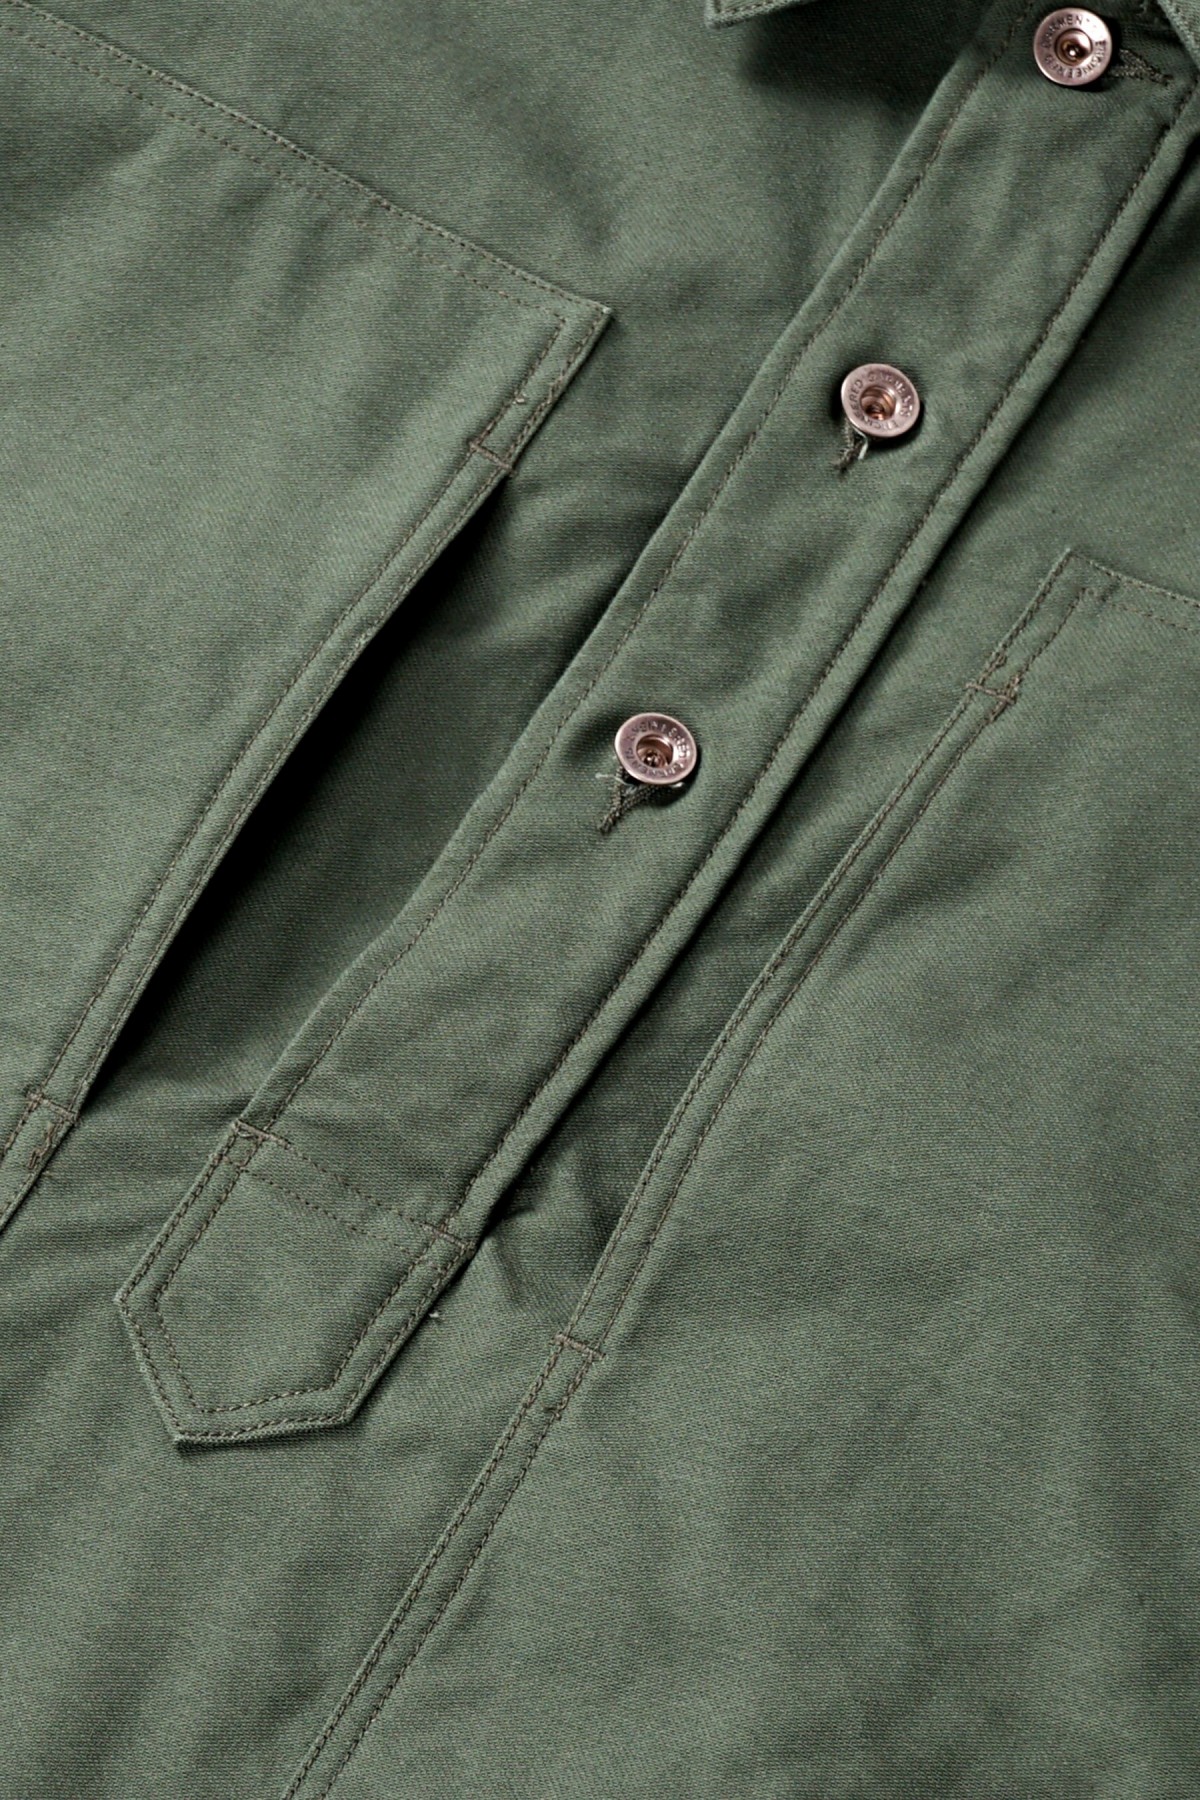 Engineered Garments Workaday Army Shirt in Olive Cotton Reverse Sateen